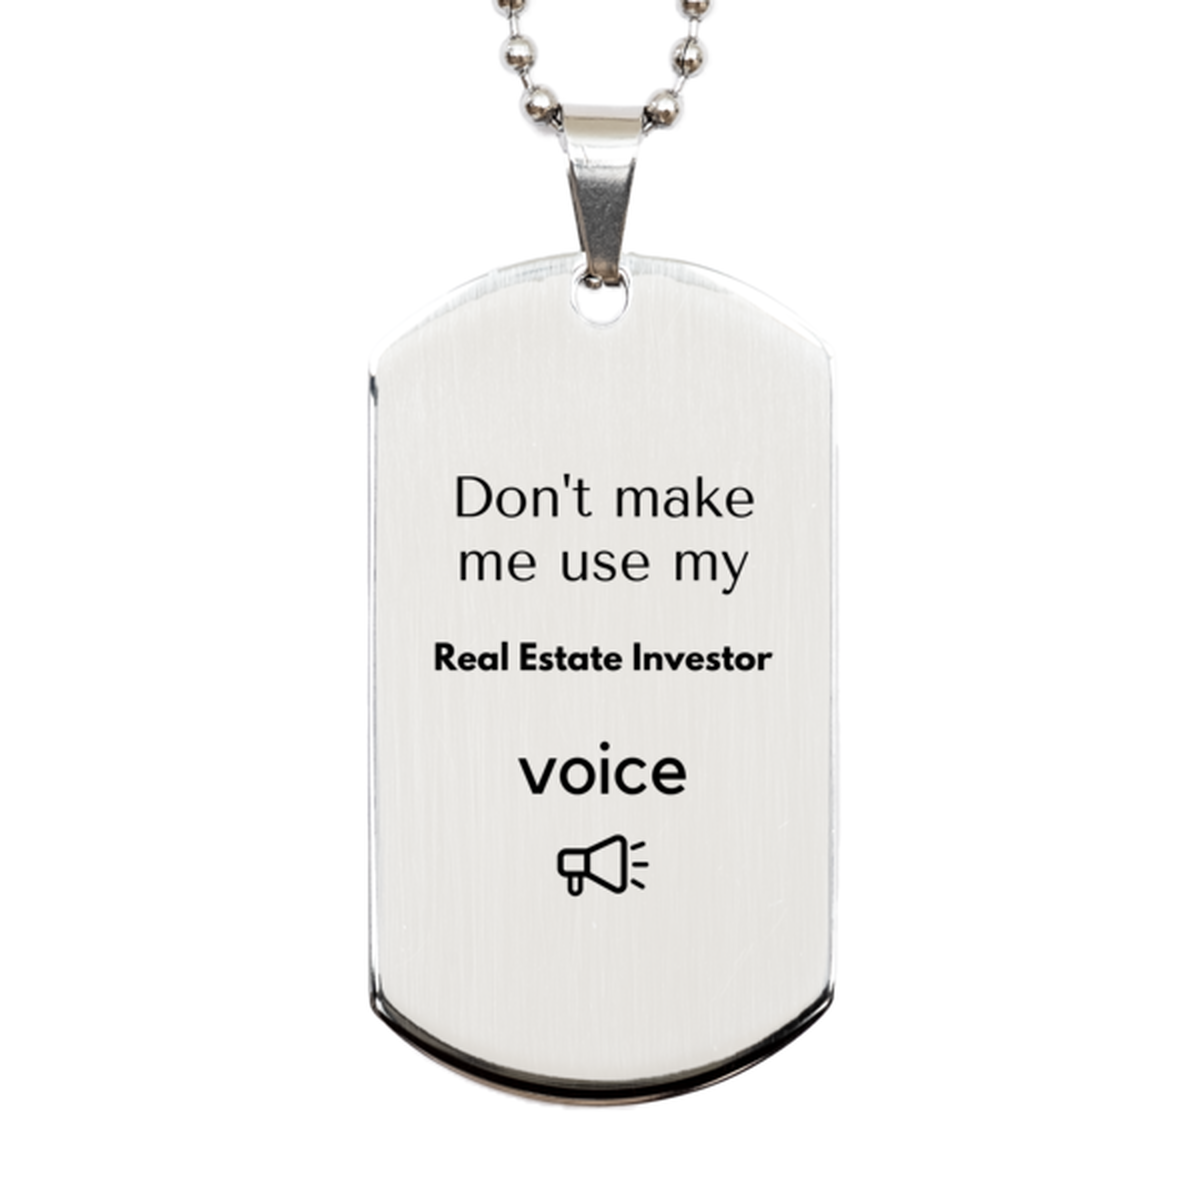 Don't make me use my Real Estate Investor voice, Sarcasm Real Estate Investor Gifts, Christmas Real Estate Investor Silver Dog Tag Birthday Unique Gifts For Real Estate Investor Coworkers, Men, Women, Colleague, Friends